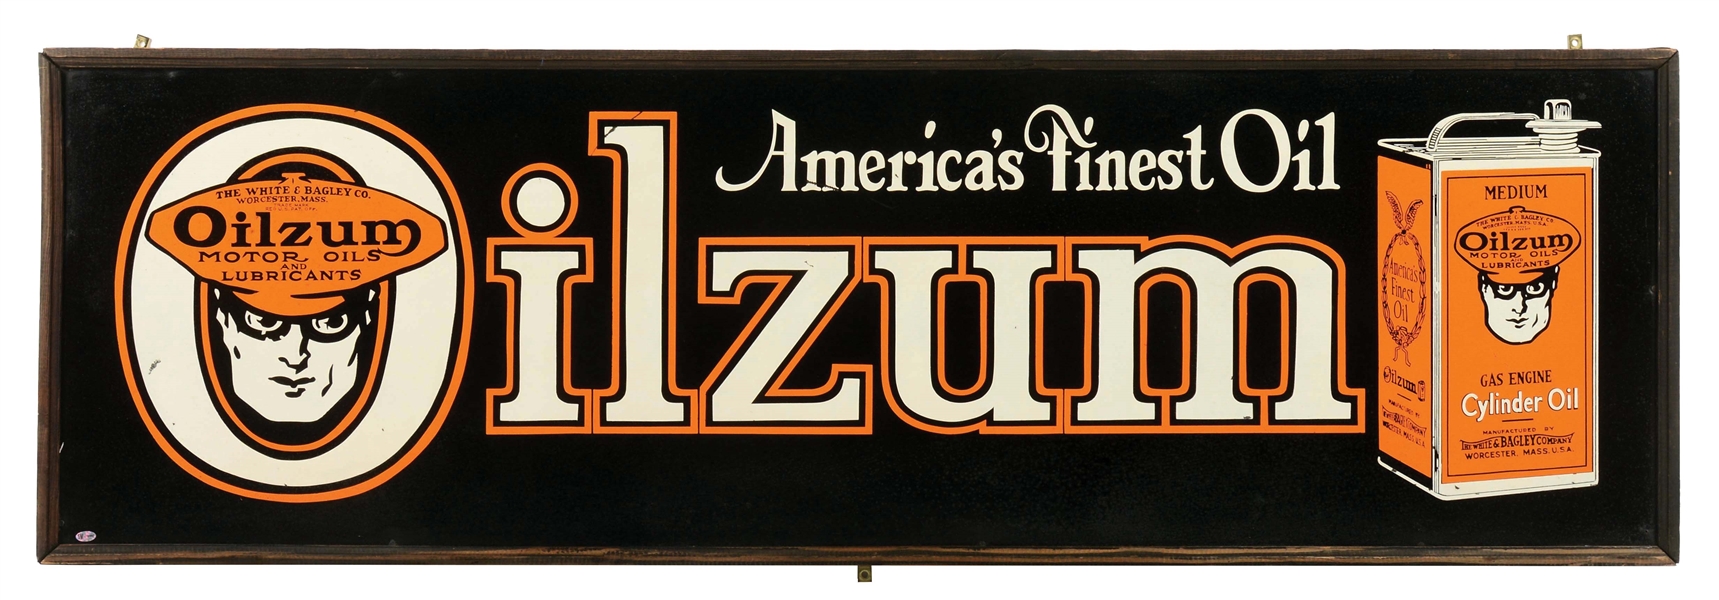 RARE & OUTSTANDING OILZUM MOTOR OILS TIN SIGN W/ CAN & OSWALD GRAPHIC. 